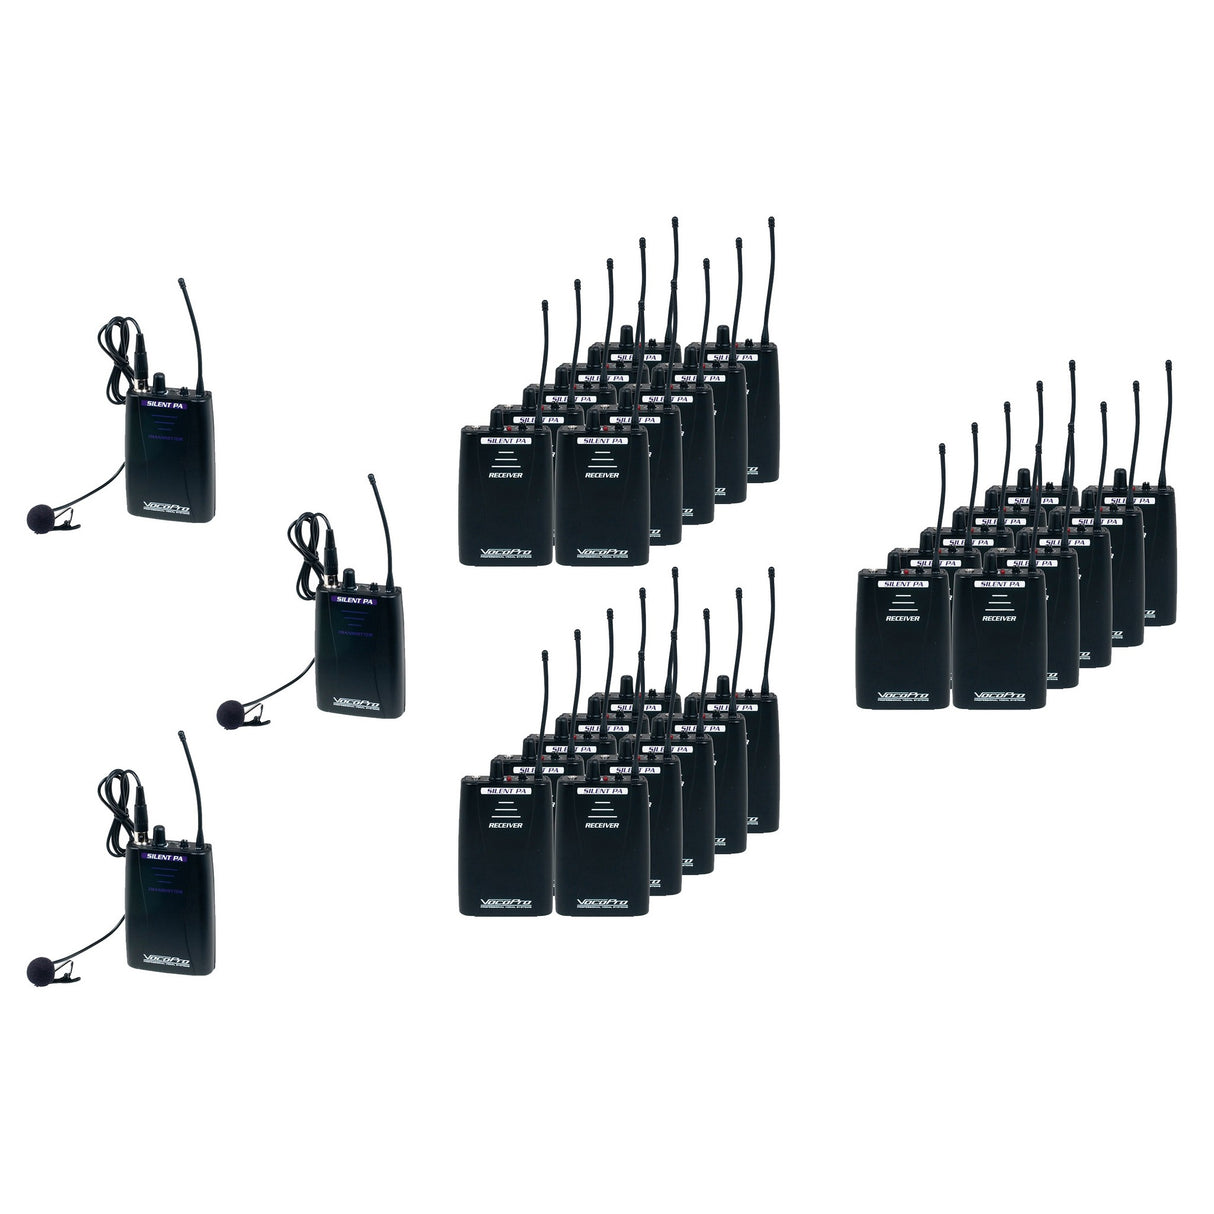 VocoPro SilentPA-TOUR30 16-Channel UHF Wireless Audio Broadcaster with 30 Receivers